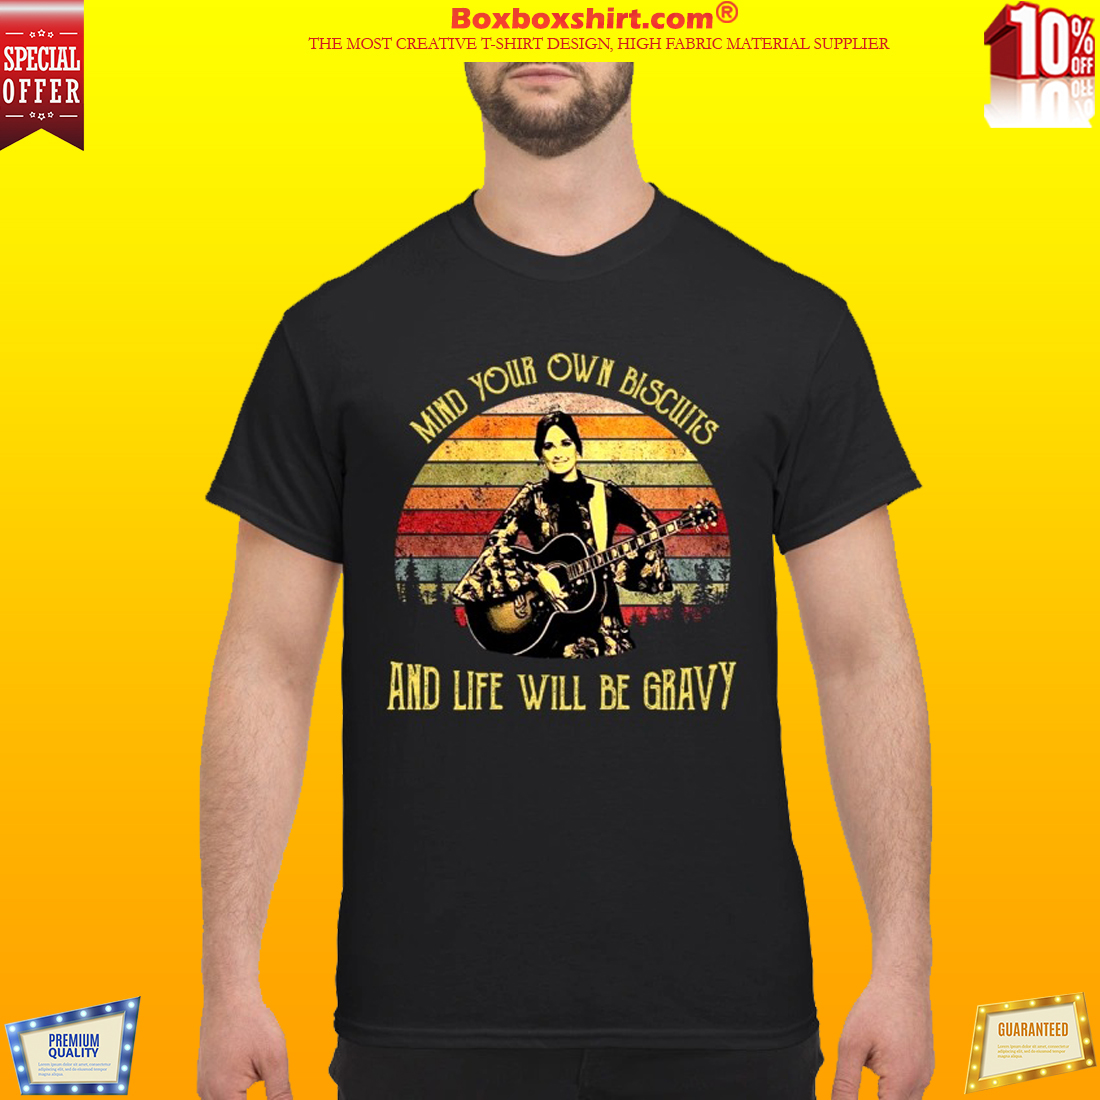 Kacey Musgraves Mind your own biscuits and life will be gravy classic shirt